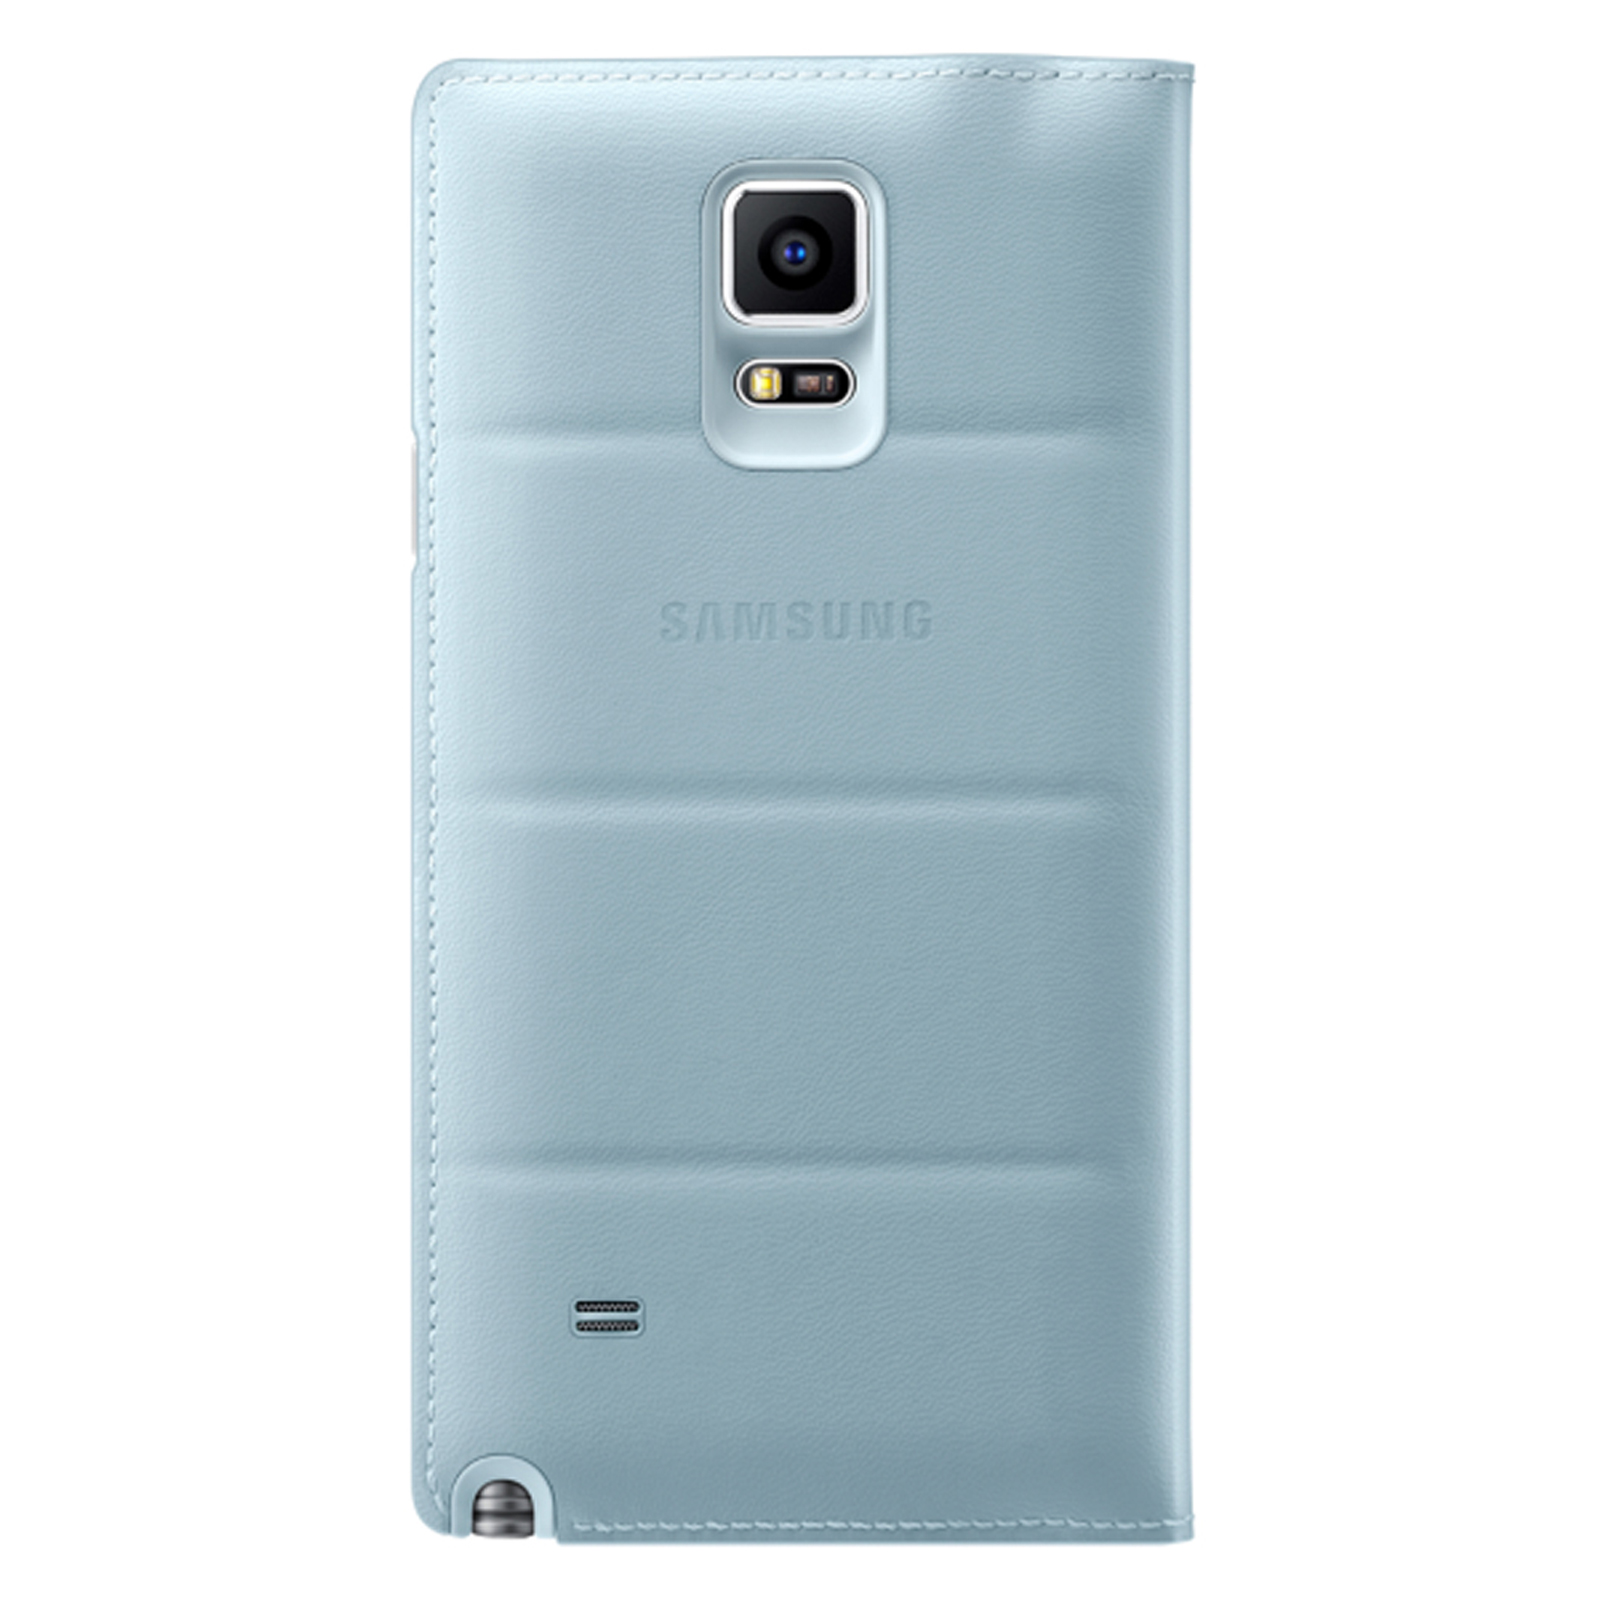 Samsung Galaxy Note 4 S View Cover – Mint Blue